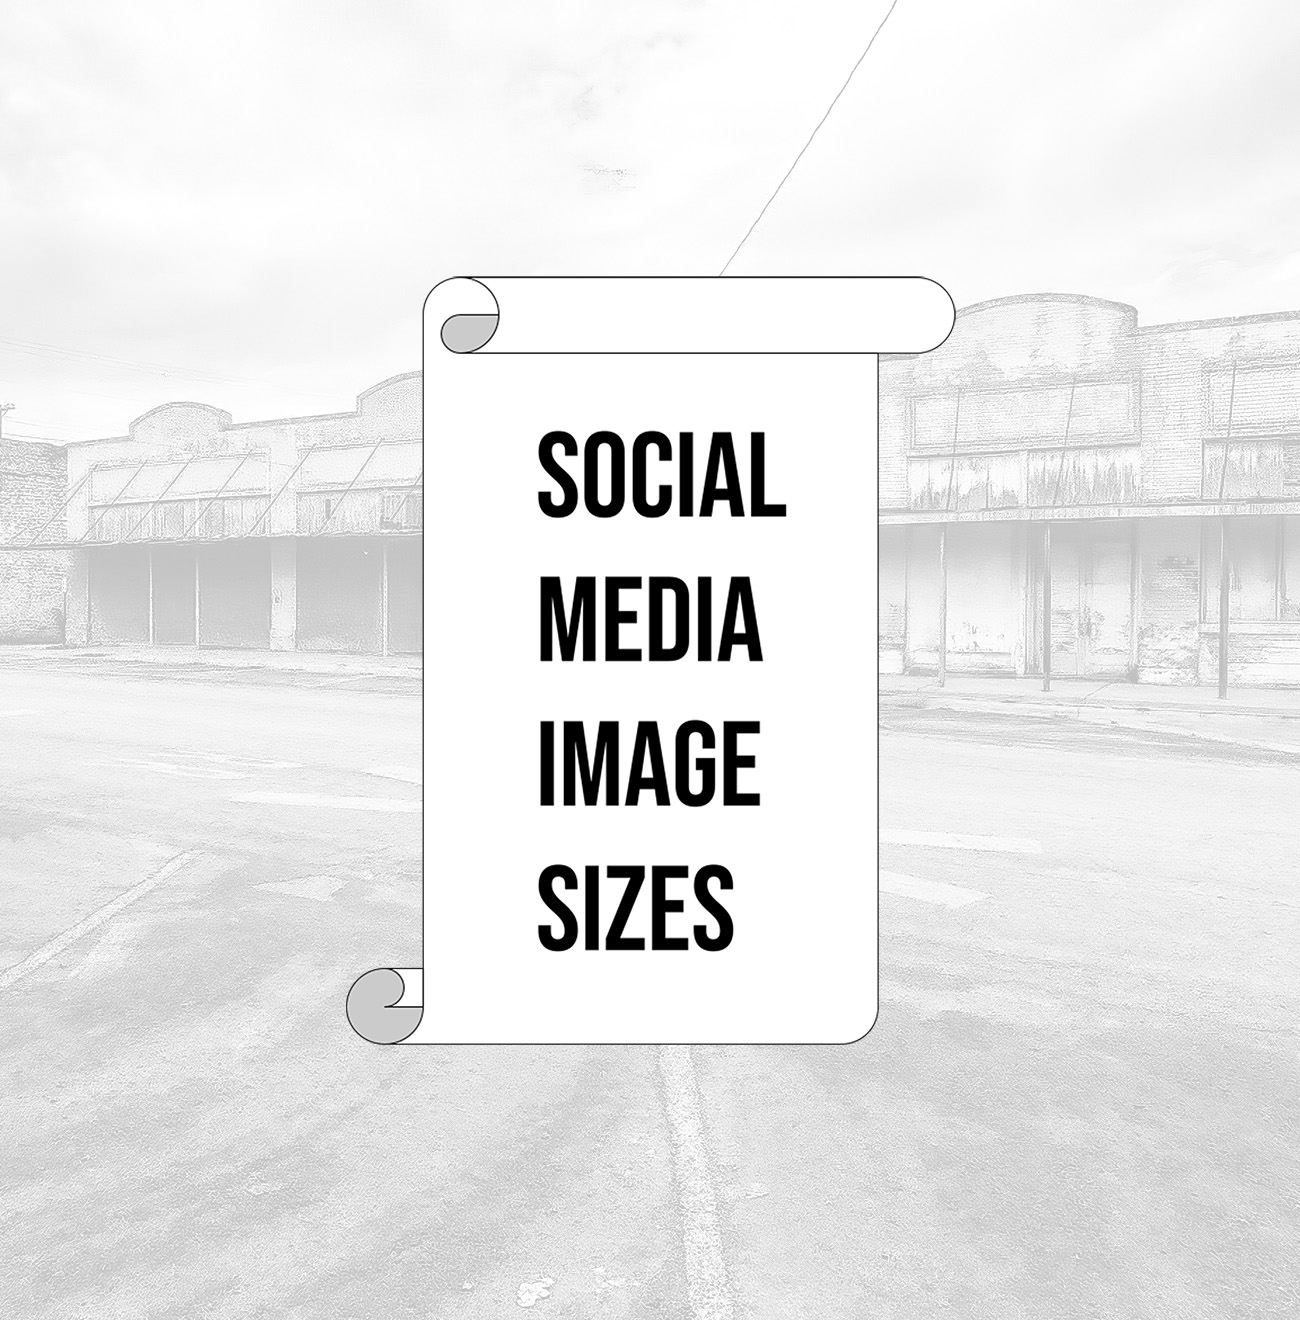 Old Sad Songs For Photographers - Social Media Image Sizes